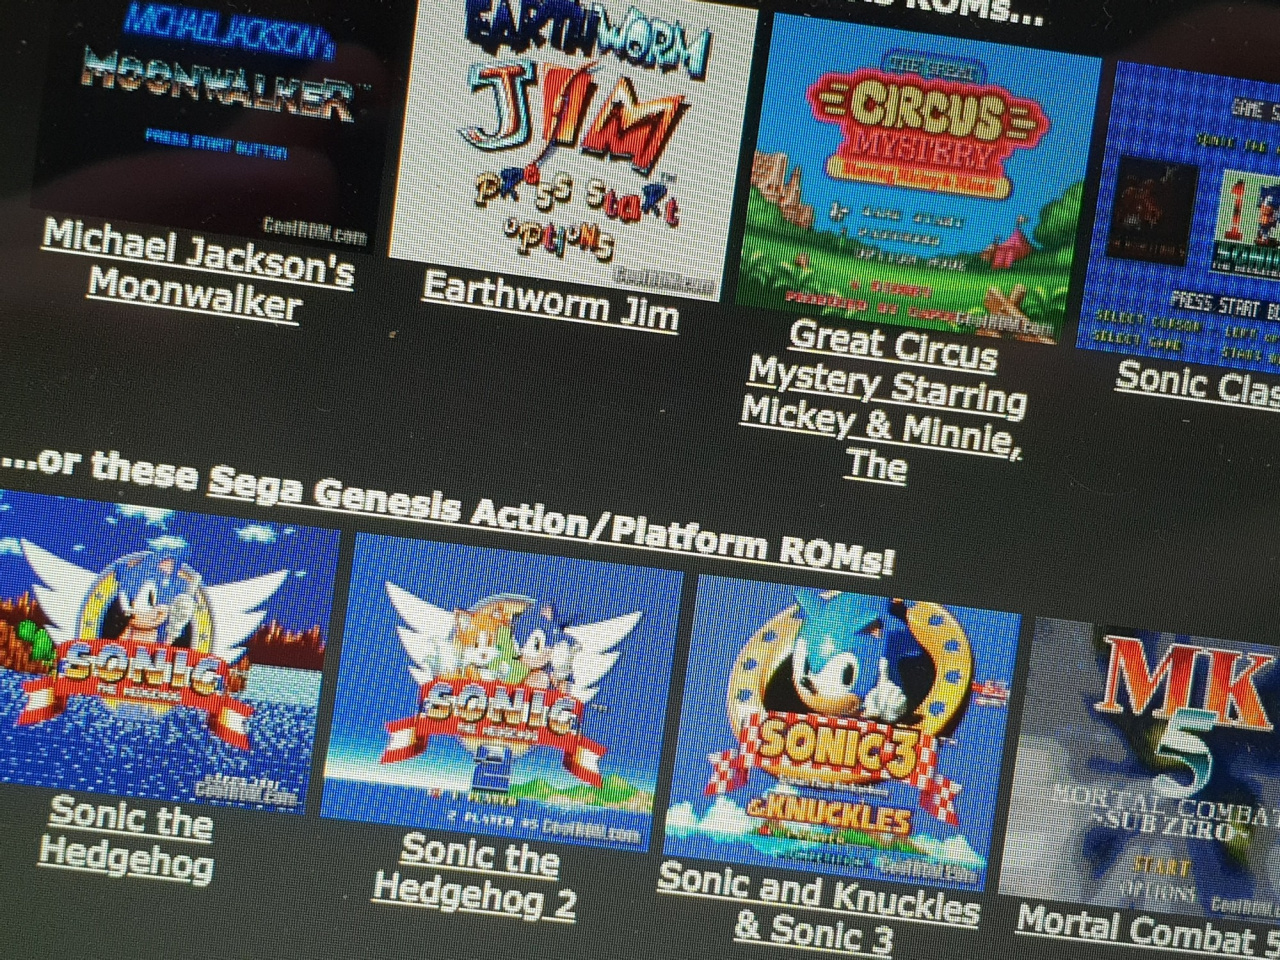 Nintendo targets ROM sites in legal crackdown - AfterDawn